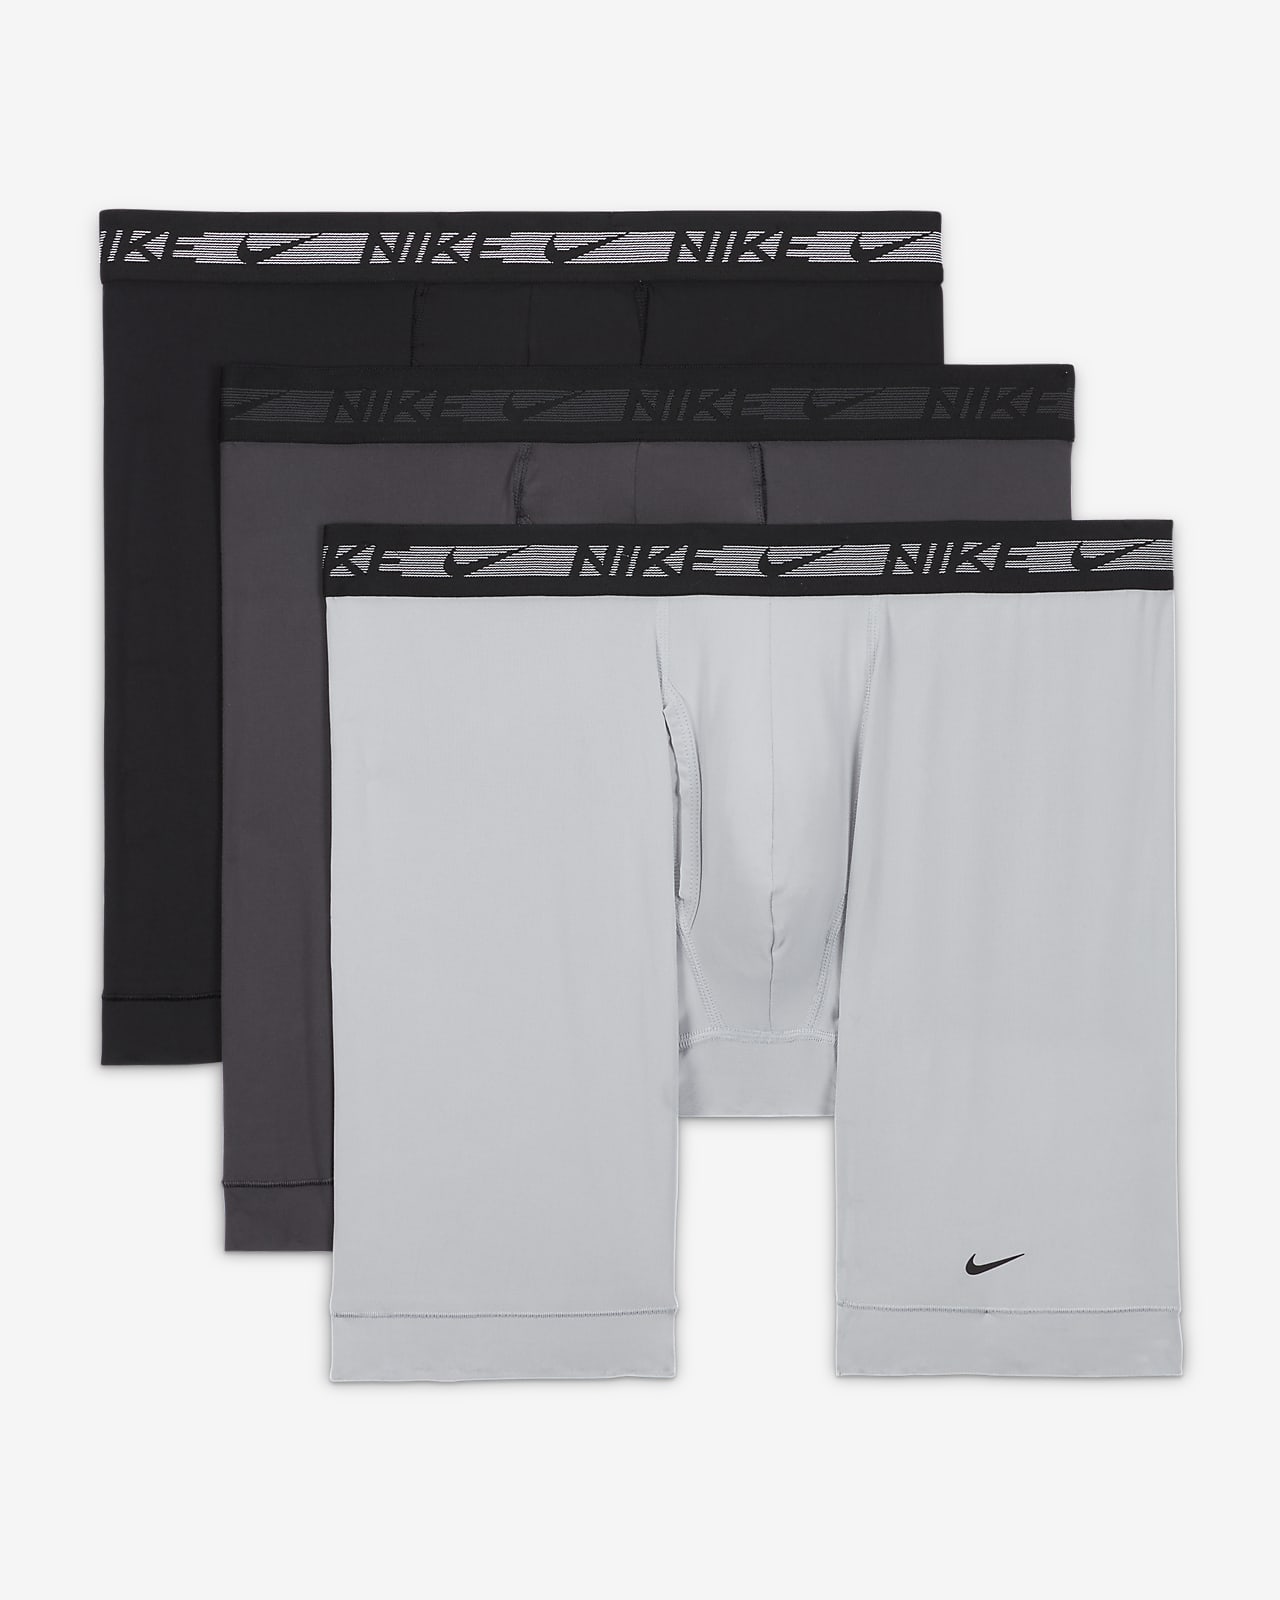 NWT NIKE 3 pack Men's Everyday Stretch Boxer Briefs Pink Gray Black M L XL